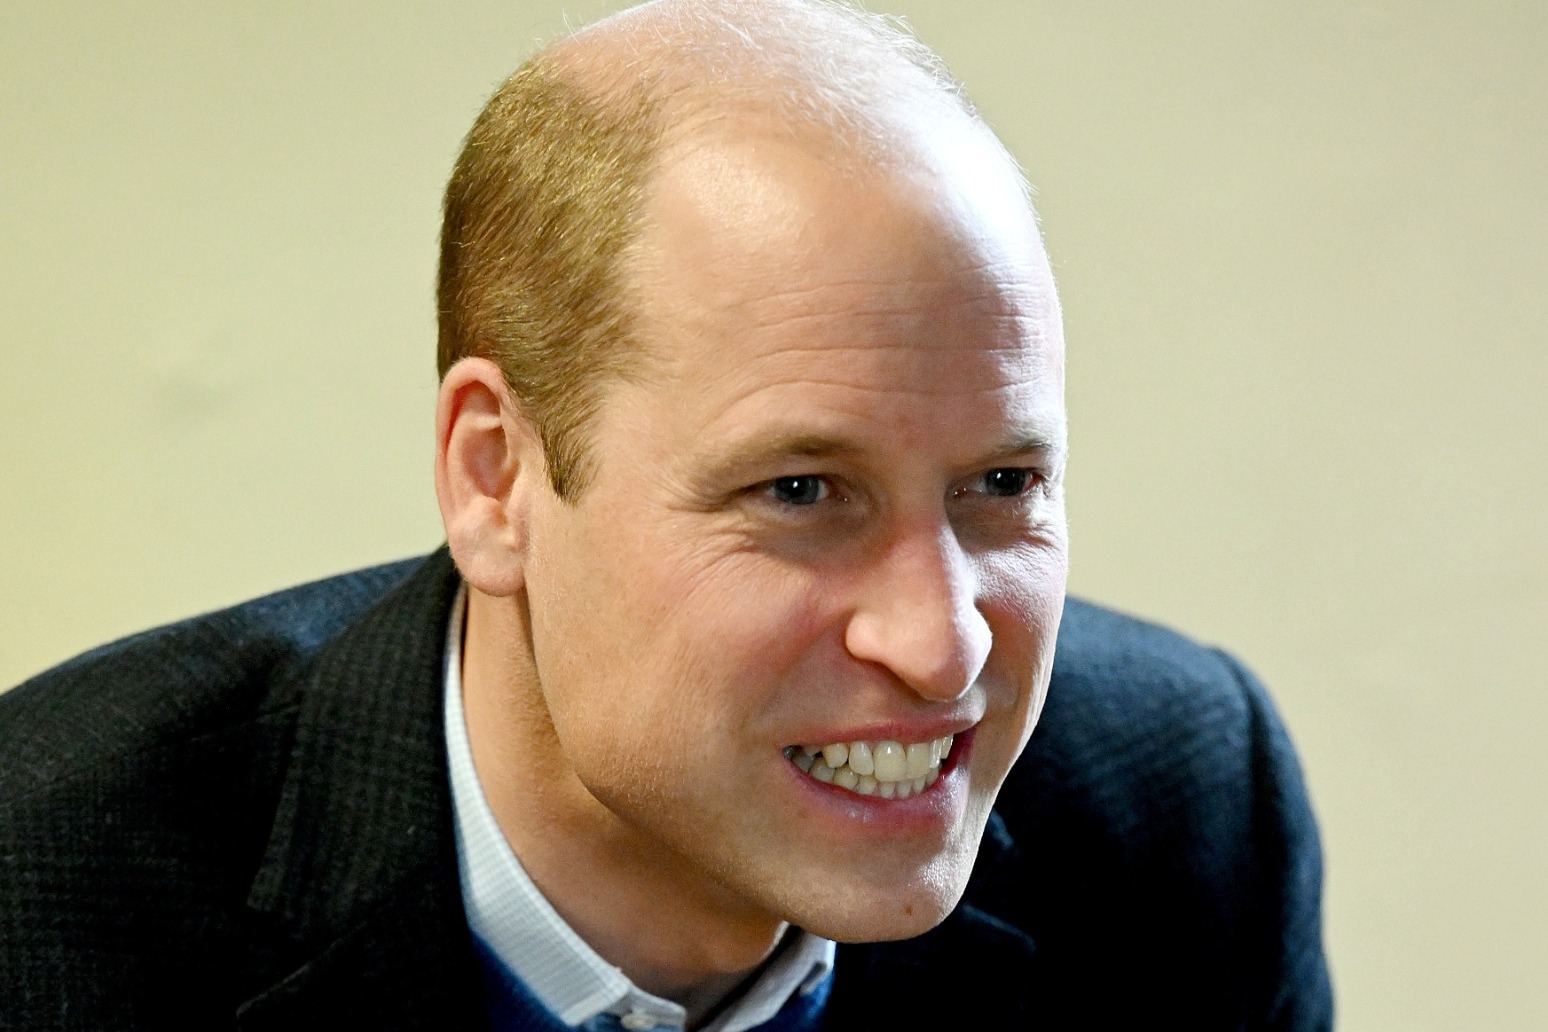 William back on duty after King’s diagnosis 